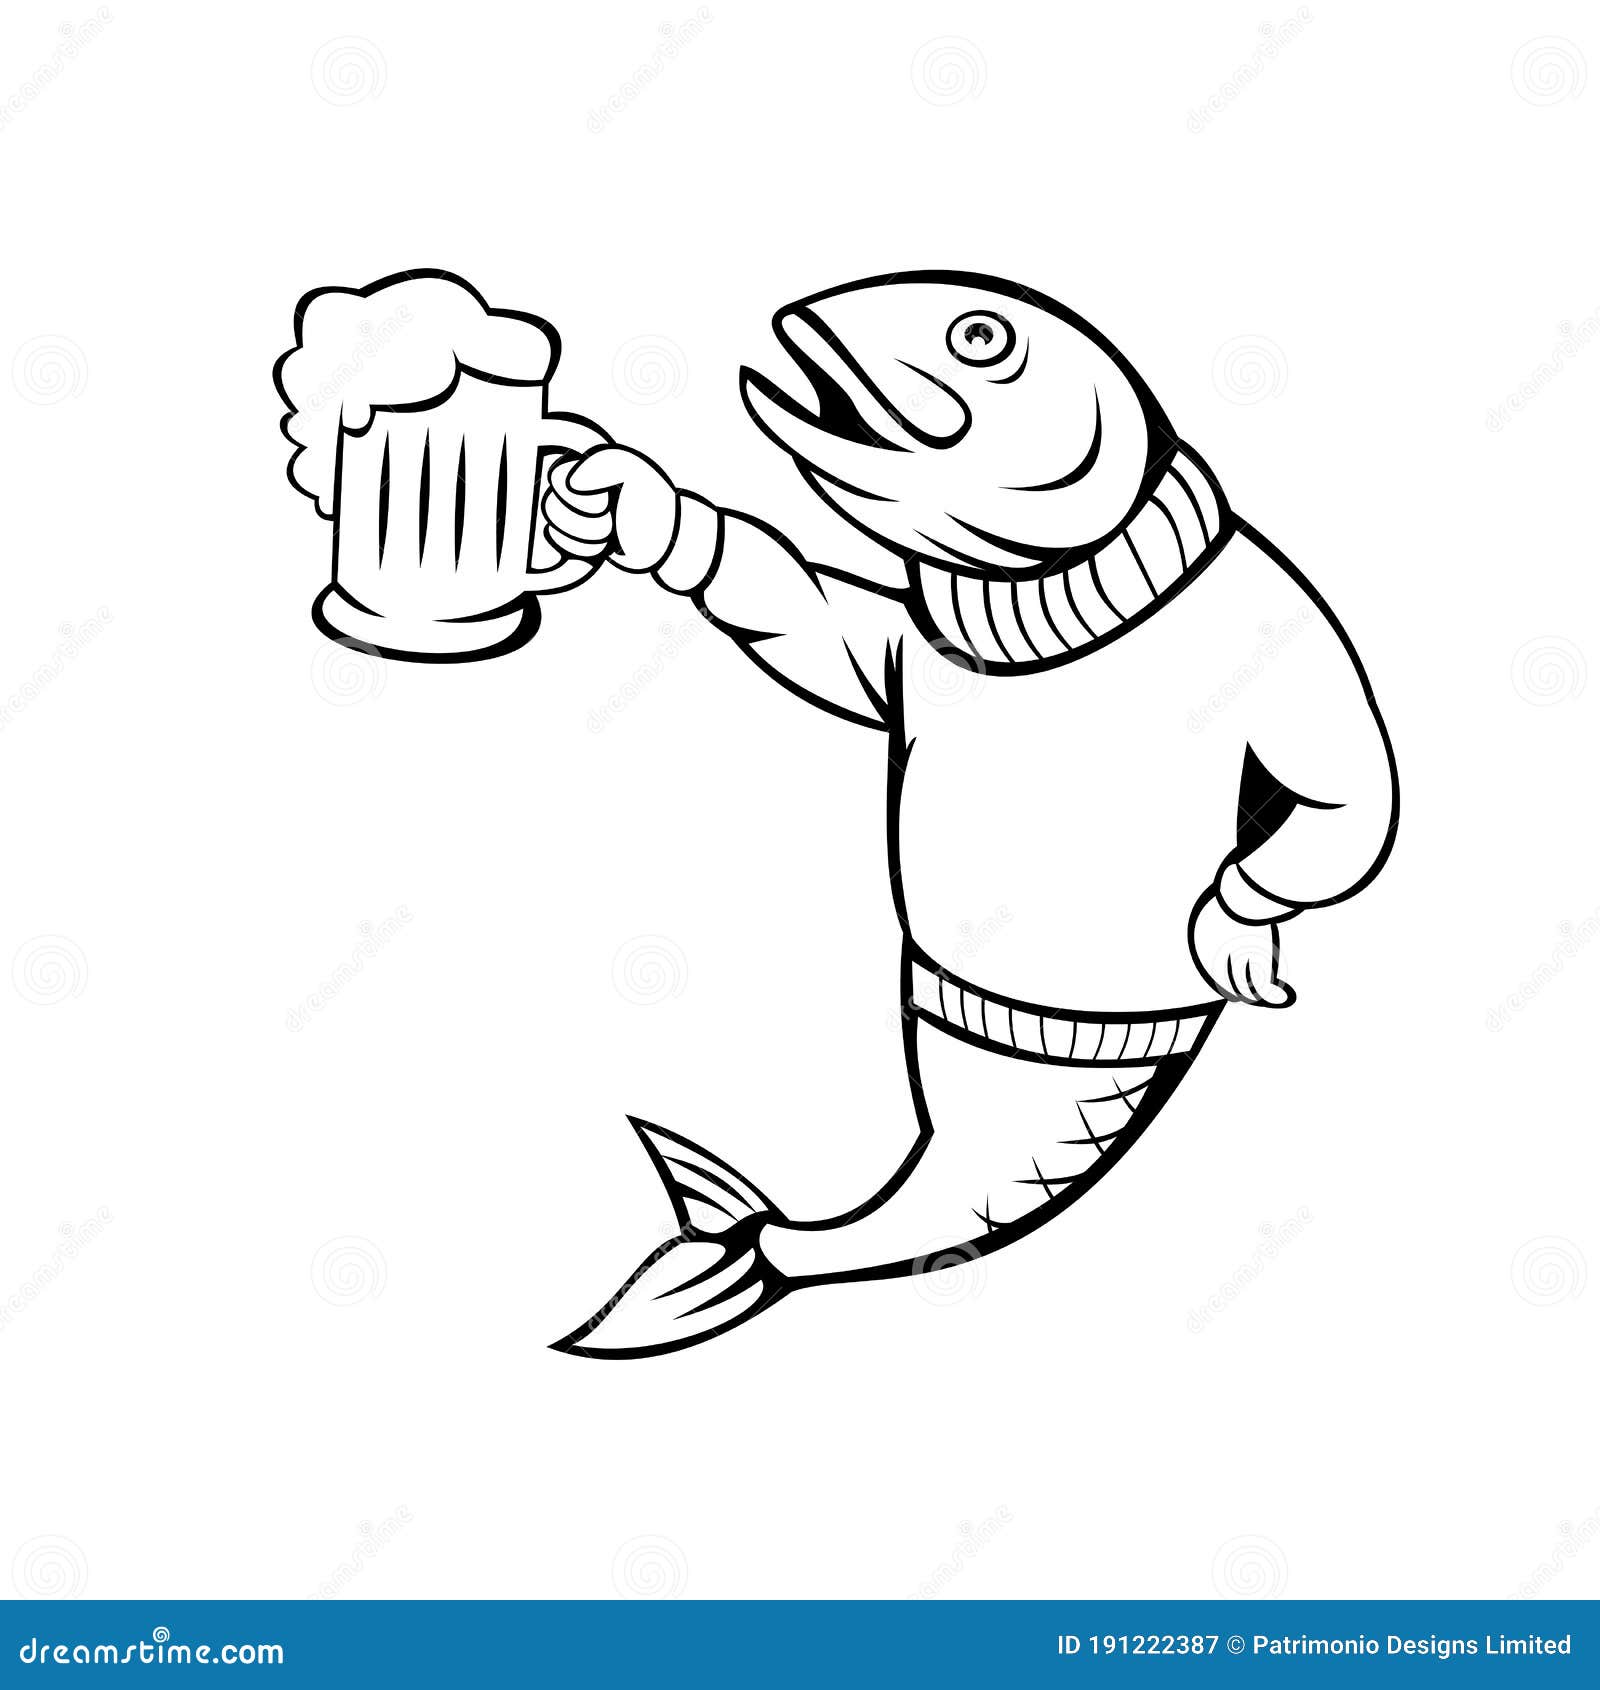 Trout or Salmon Fish Holding Up Beer Mug of Ale Wearing Sweater Cartoon  Black and White Stock Vector - Illustration of graphic, alcohol: 191222387